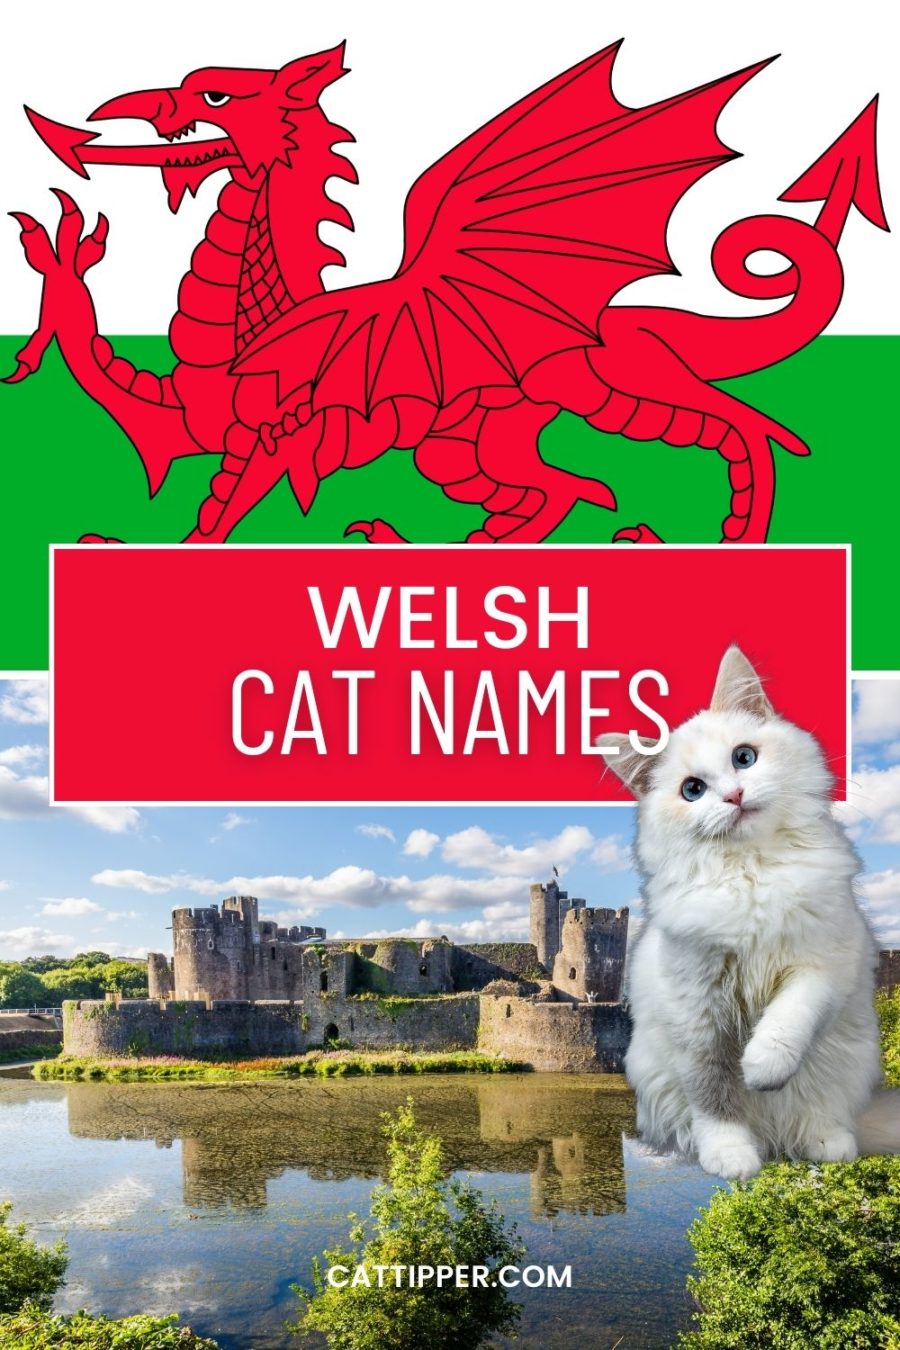 Welsh cat Names - image of Welsh Castle and Welsh Flag with white cat